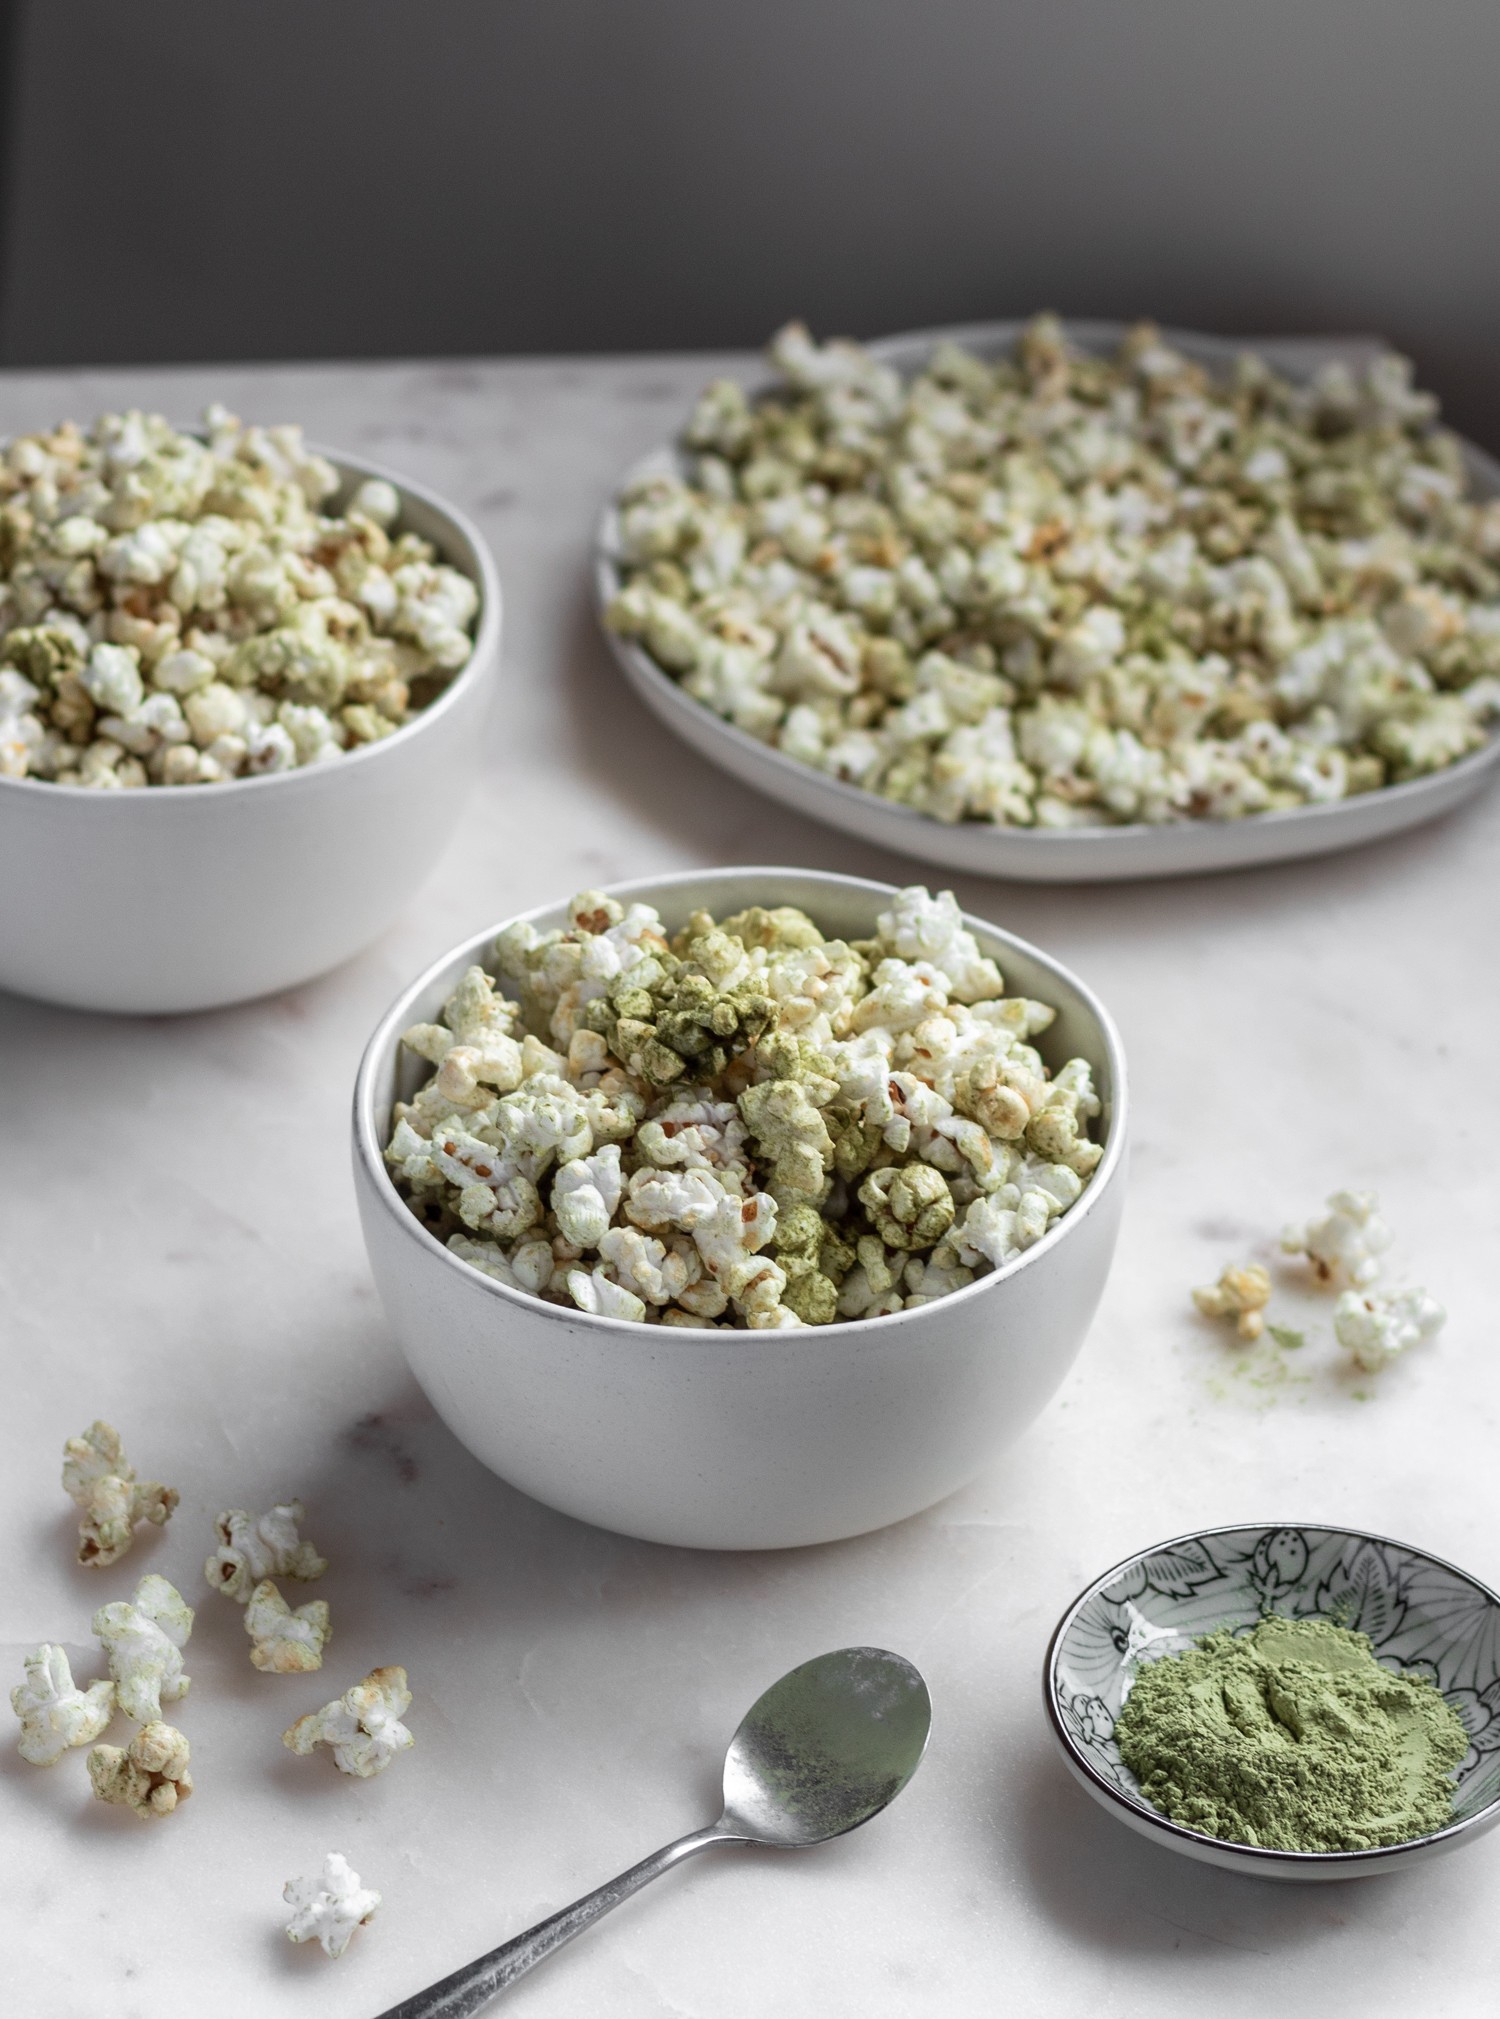 Popcorn lightly sweetened and flavored with green tea.